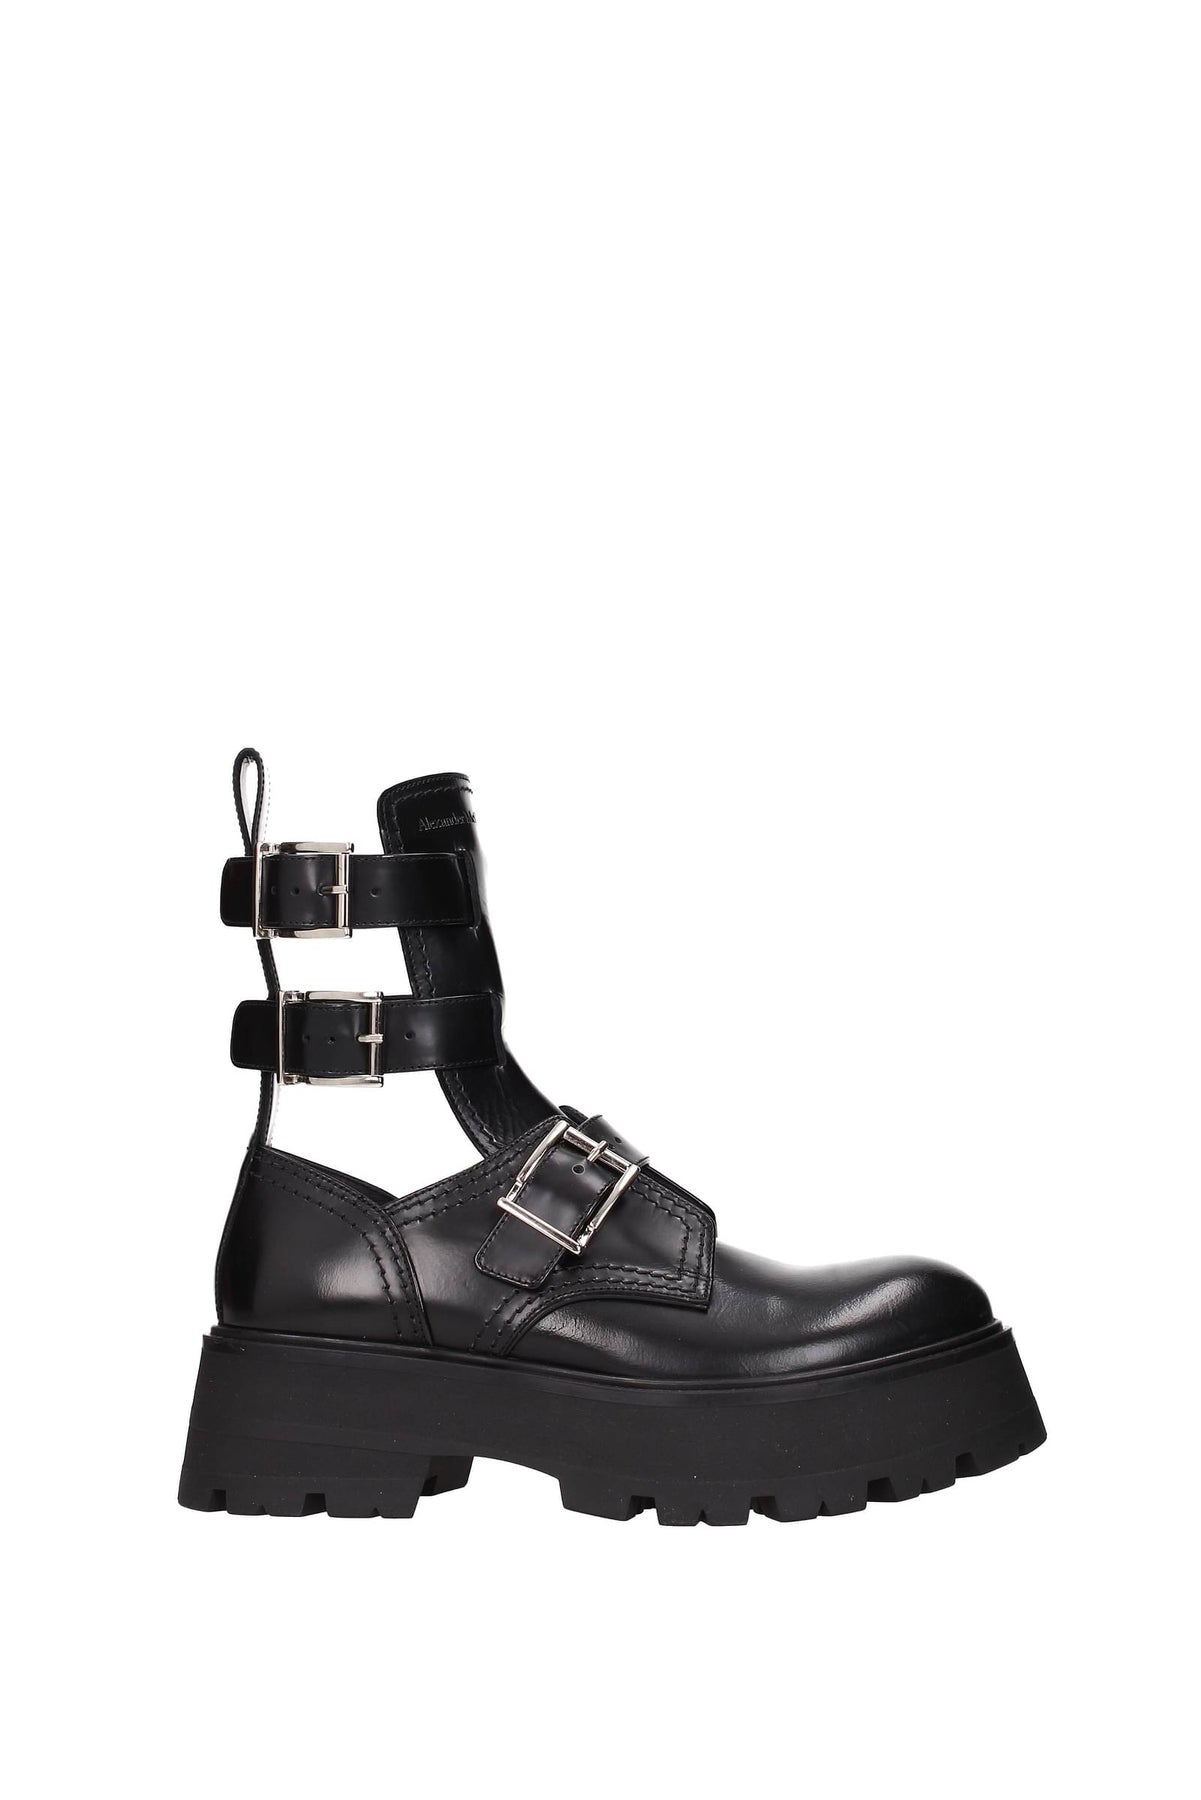 Leather boots Alexander McQueen Black size 38 EU in Leather - 37025645